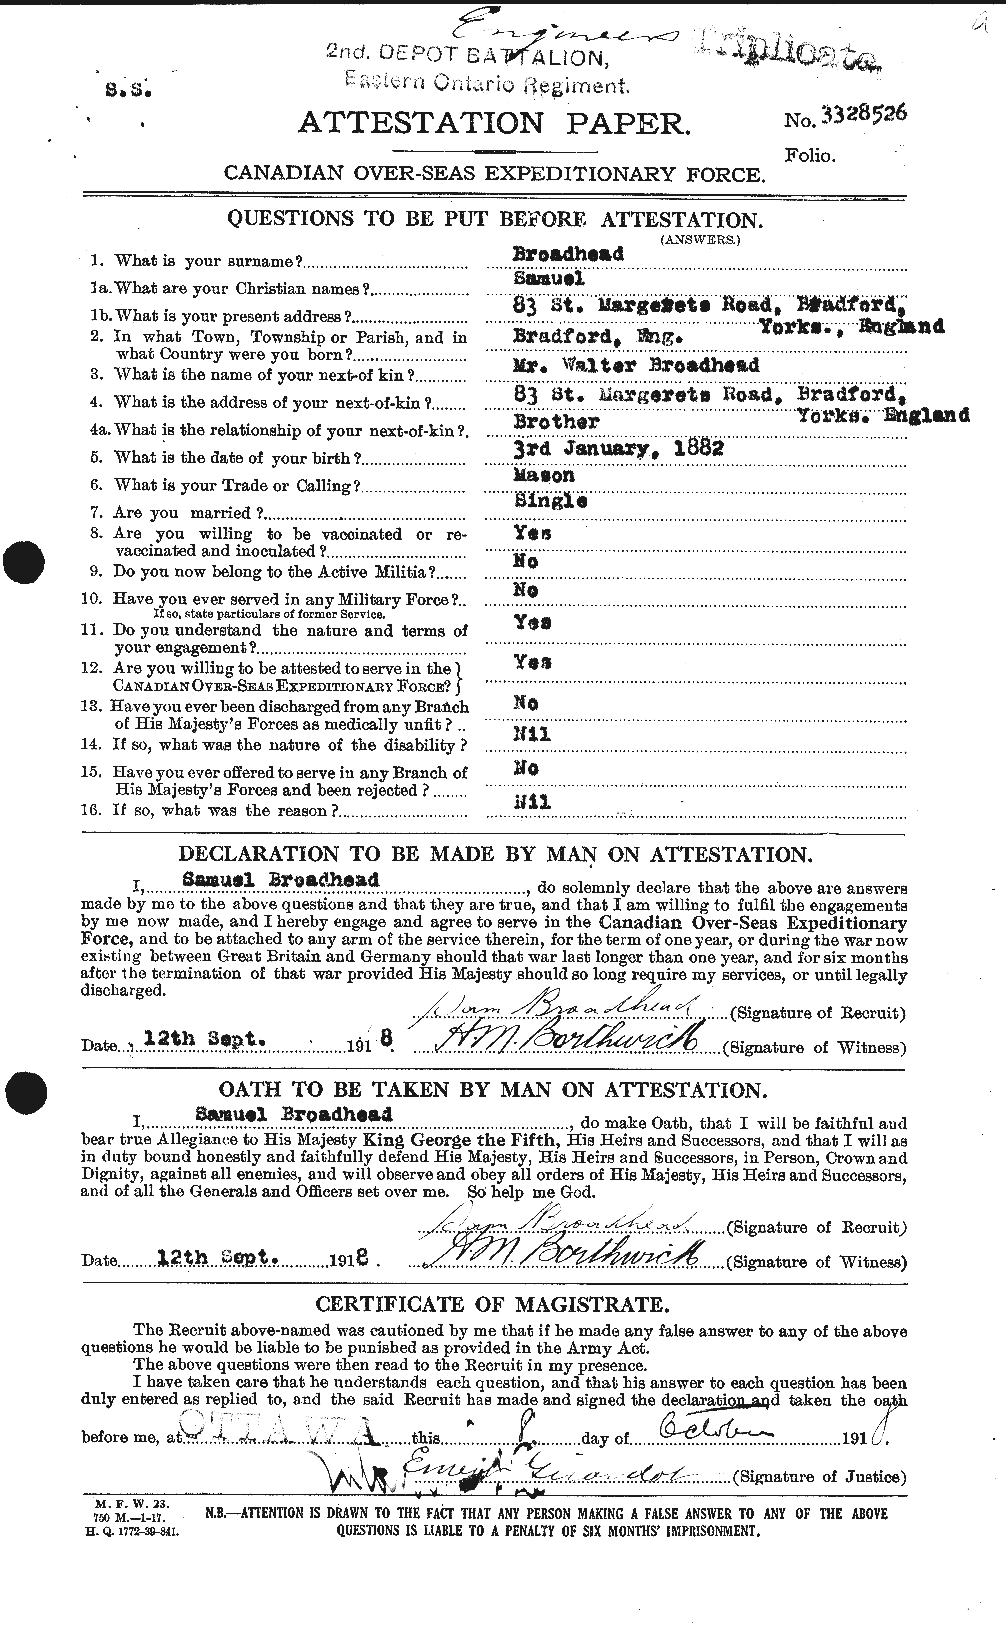 Personnel Records of the First World War - CEF 263782a